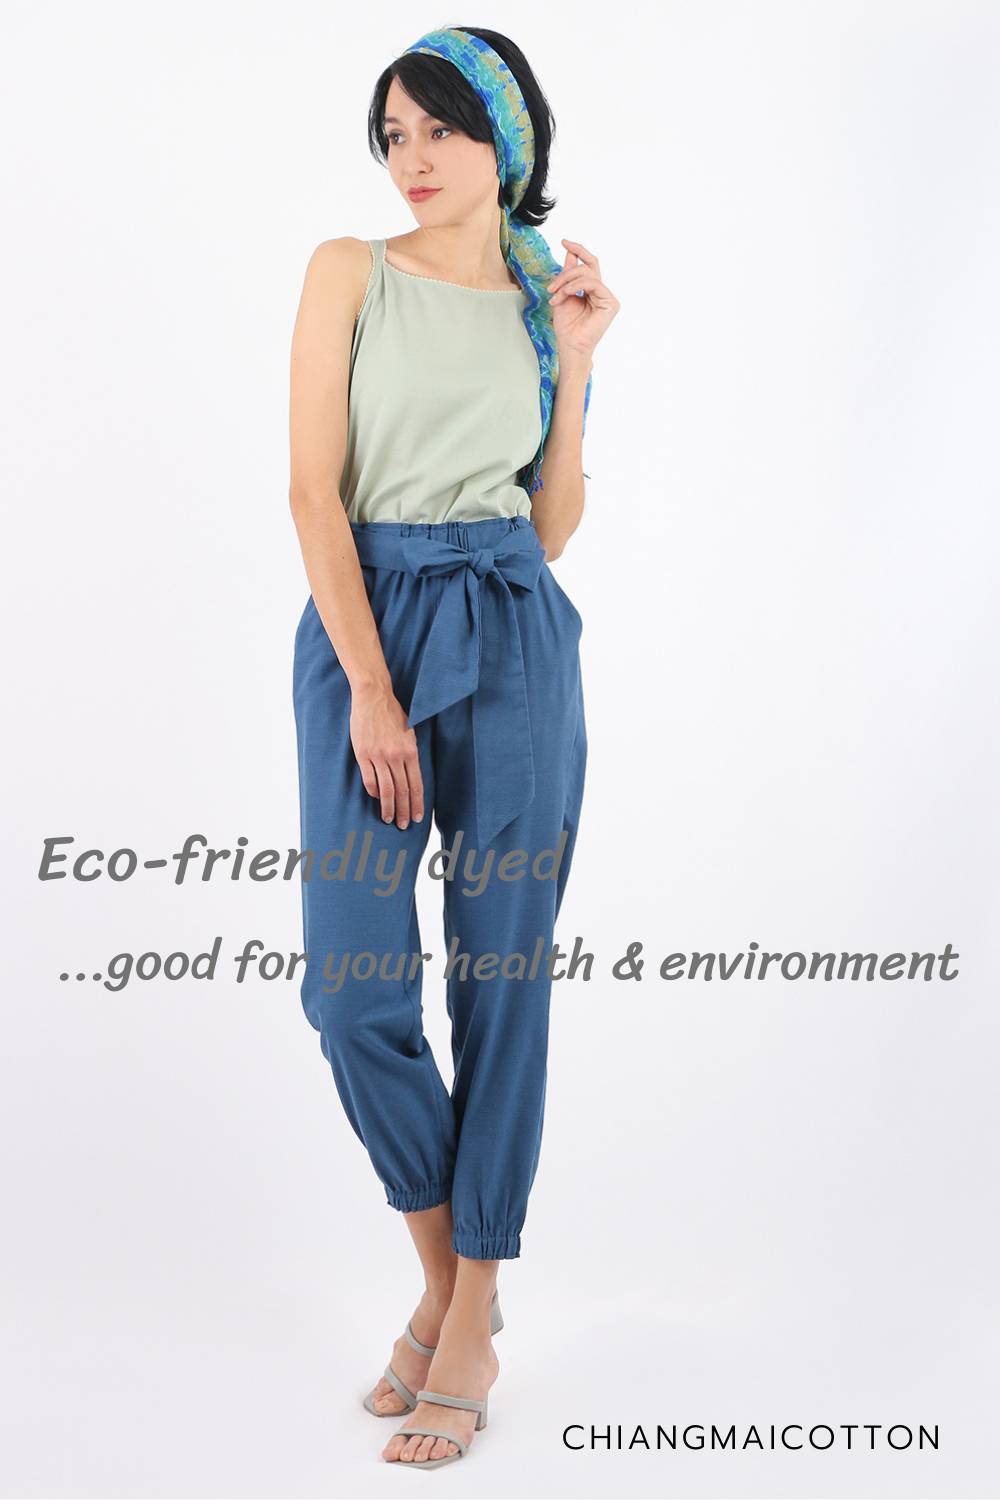 eco-friendly-dyed